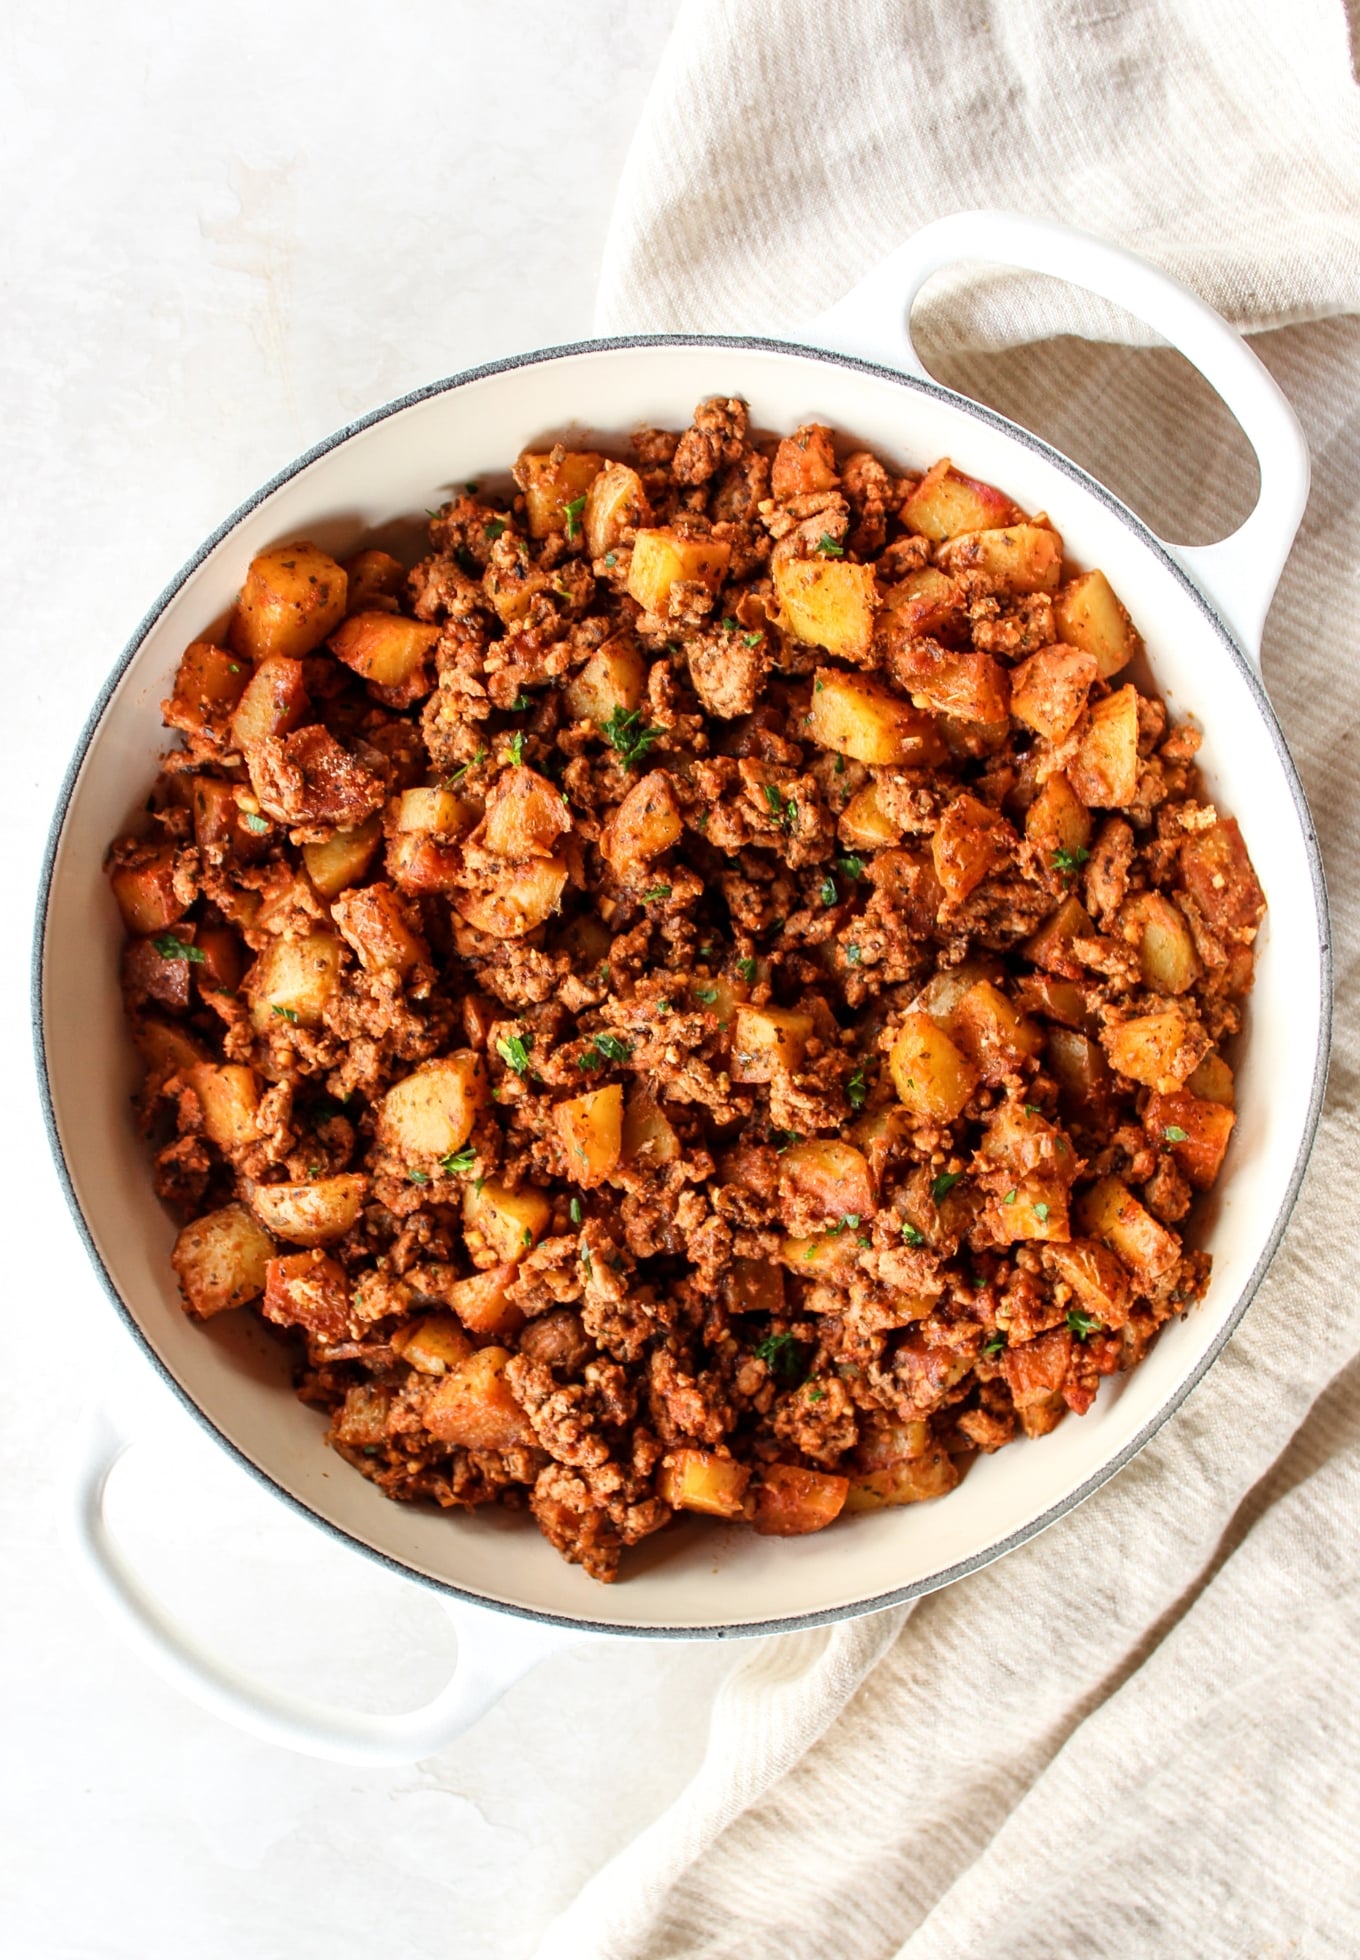 https://thewholecook.com/wp-content/uploads/2020/04/Ground-Turkey-Potato-Skillet-by-The-Whole-Cook-vertical.jpg